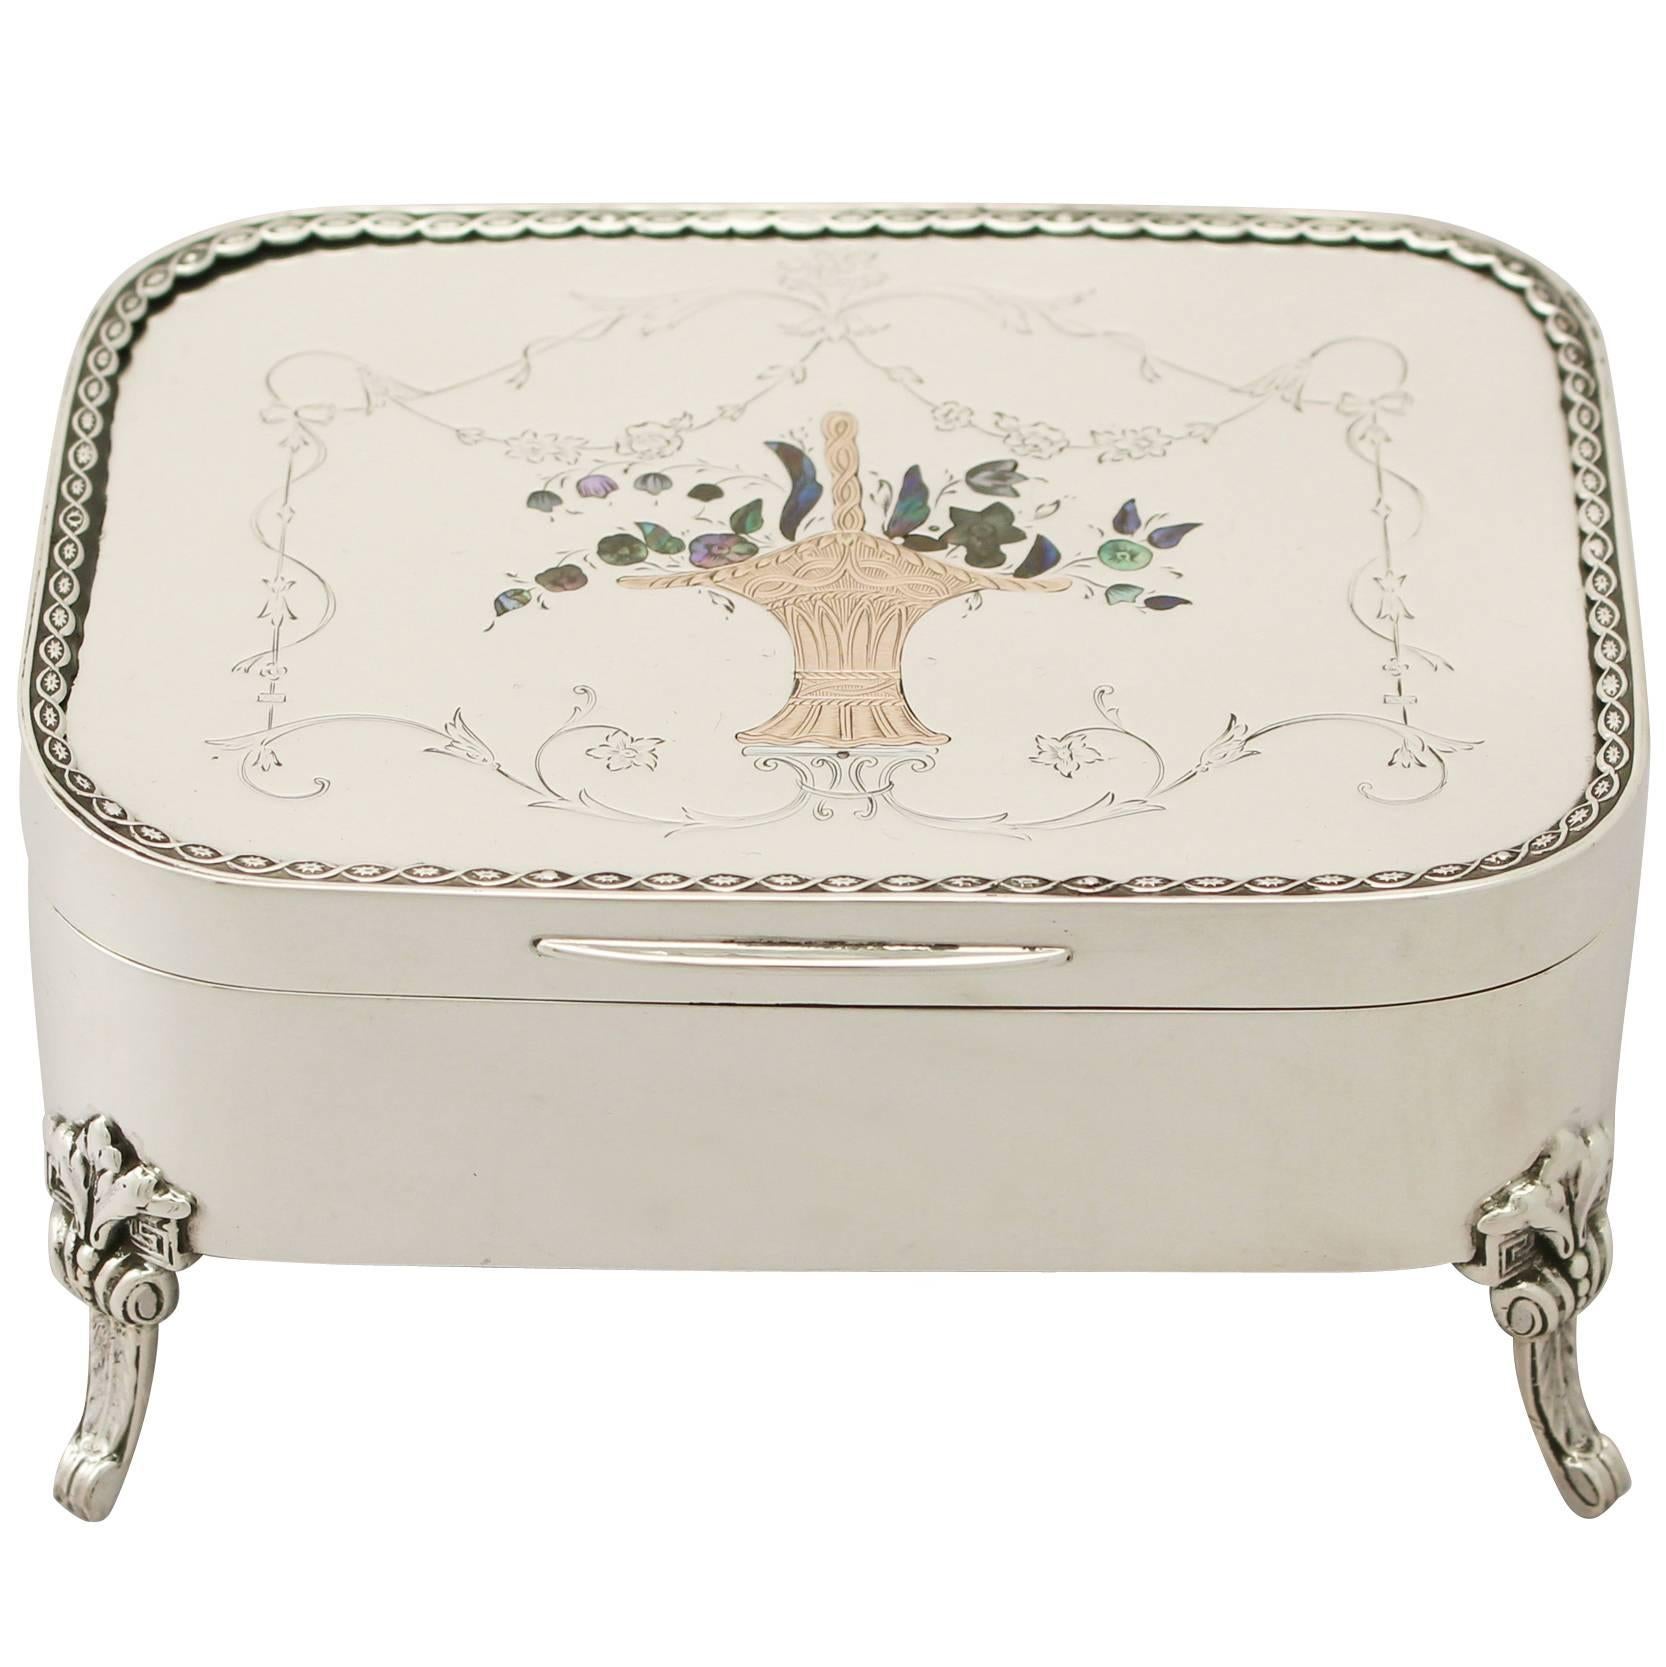 Sterling Silver Jewelry Box - Antique Edwardian